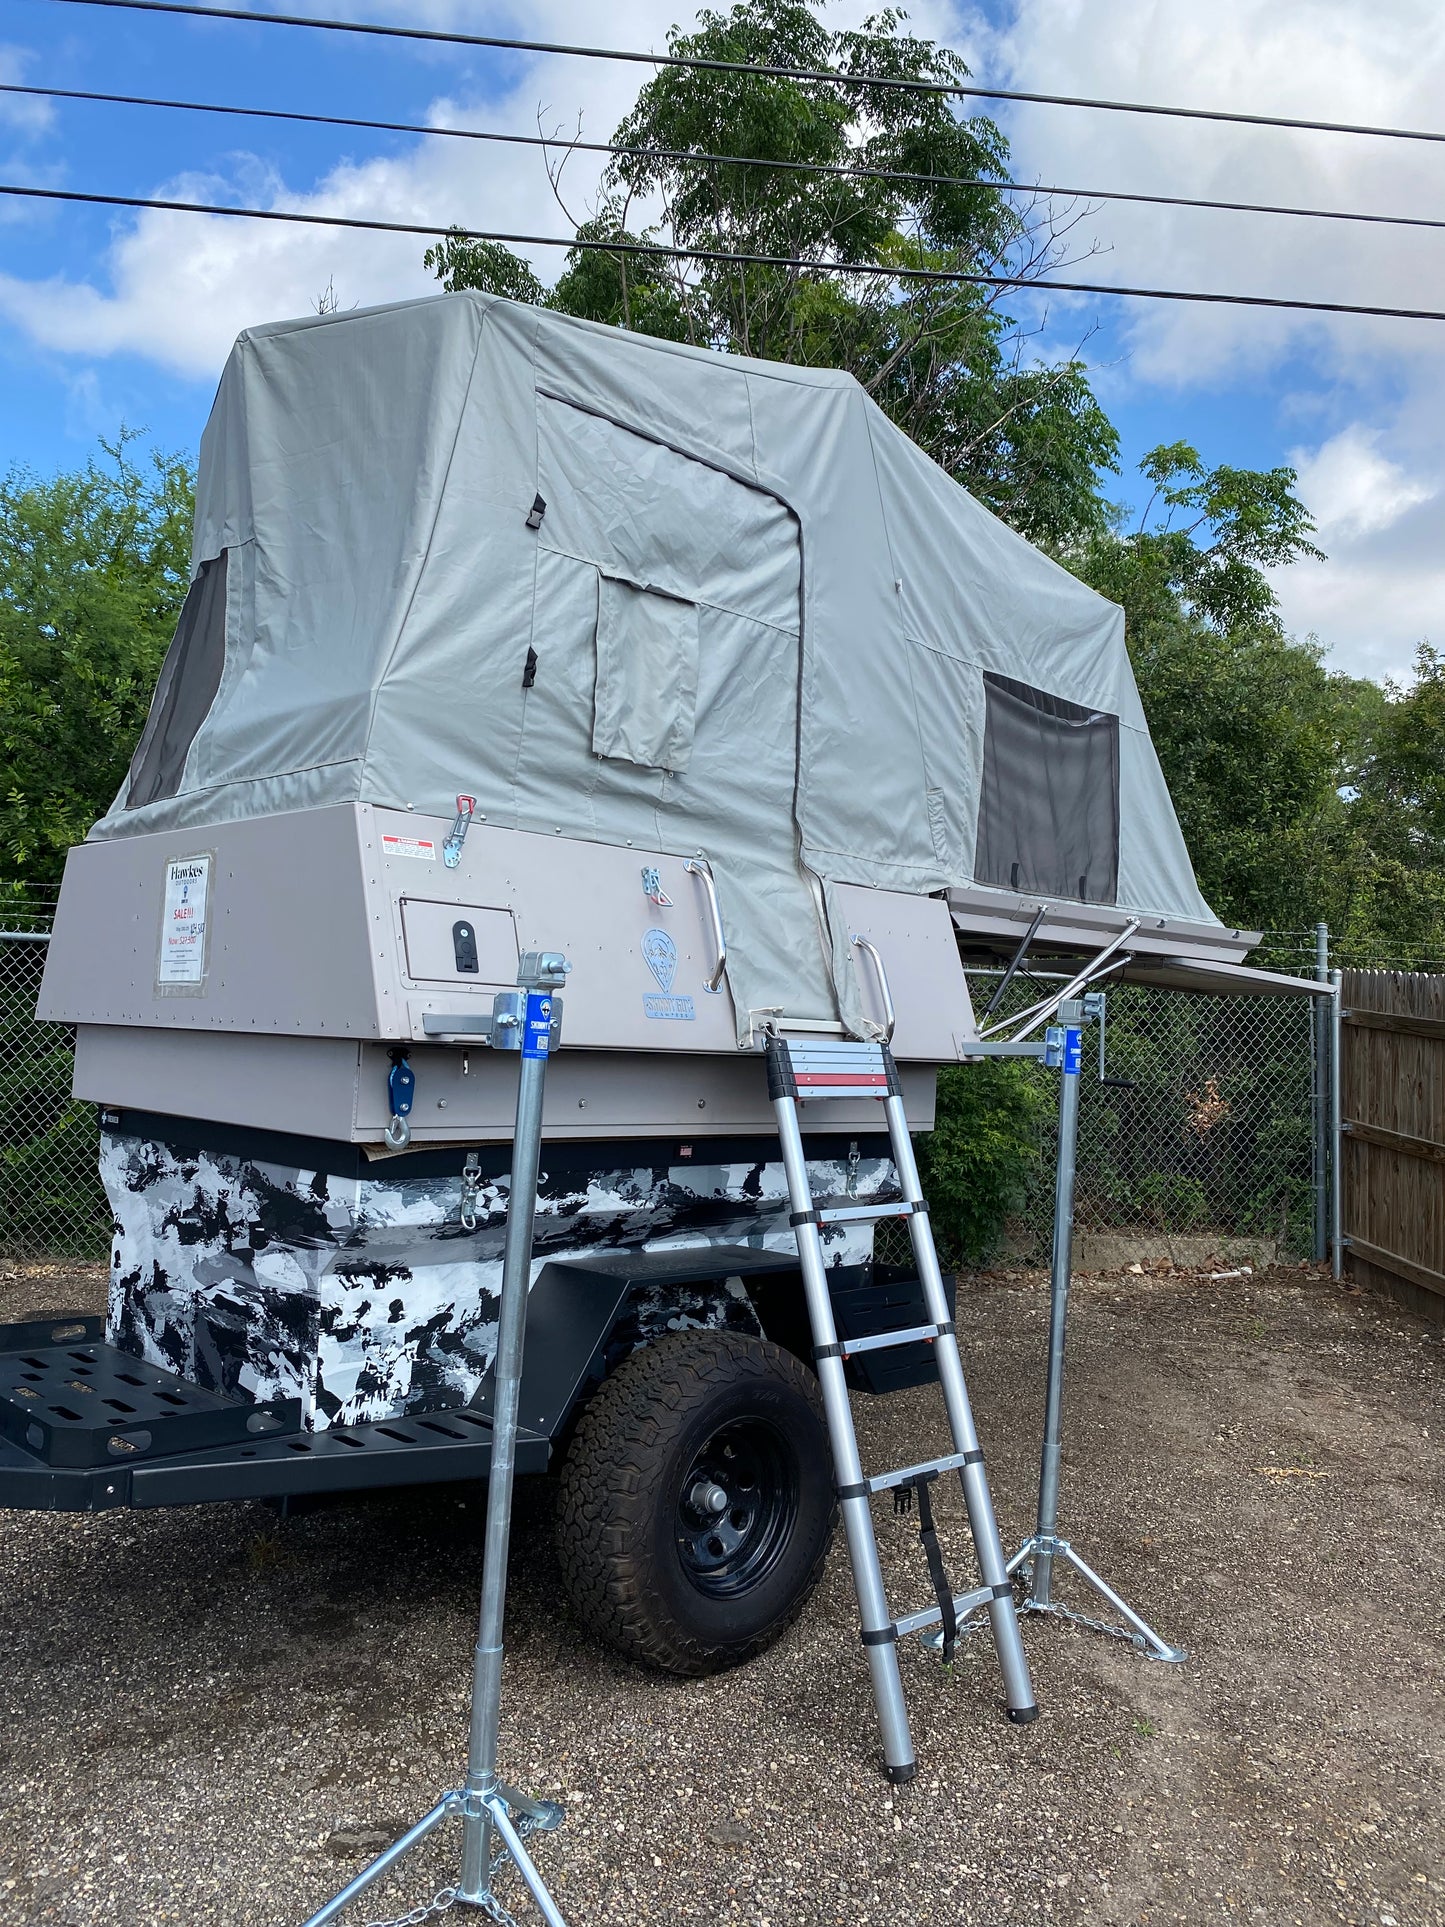 skinny guy truck bed all weather campers kit n kaboodle with outdoor kitchen and solar for sale near san angelo abiline texas at hawkes outdoors 2102512882